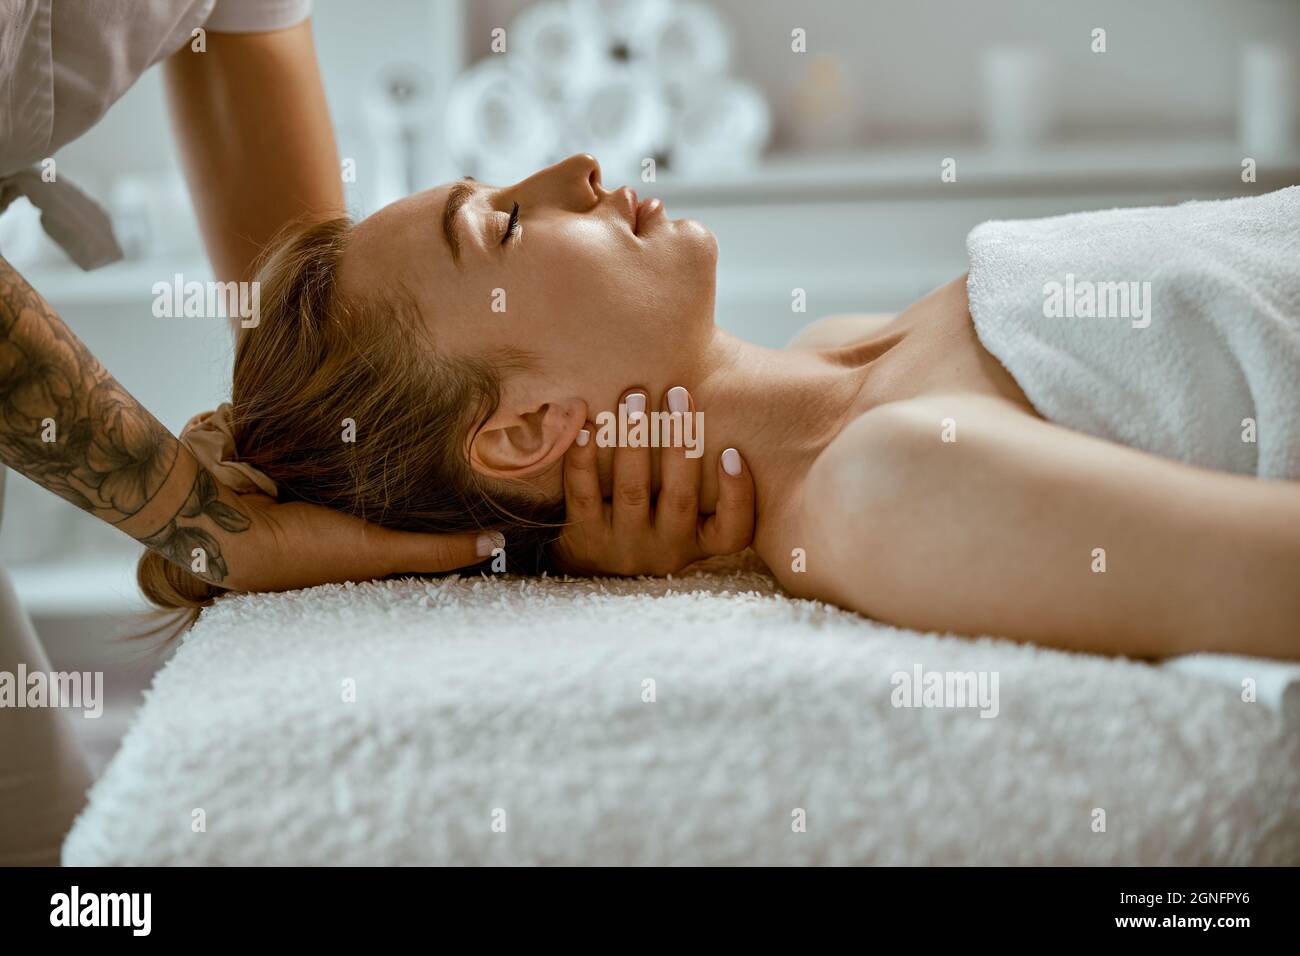 https://c8.alamy.com/comp/2GNFPY6/adult-female-specialist-is-doing-neck-massage-to-a-young-natural-beautyful-female-client-2GNFPY6.jpg